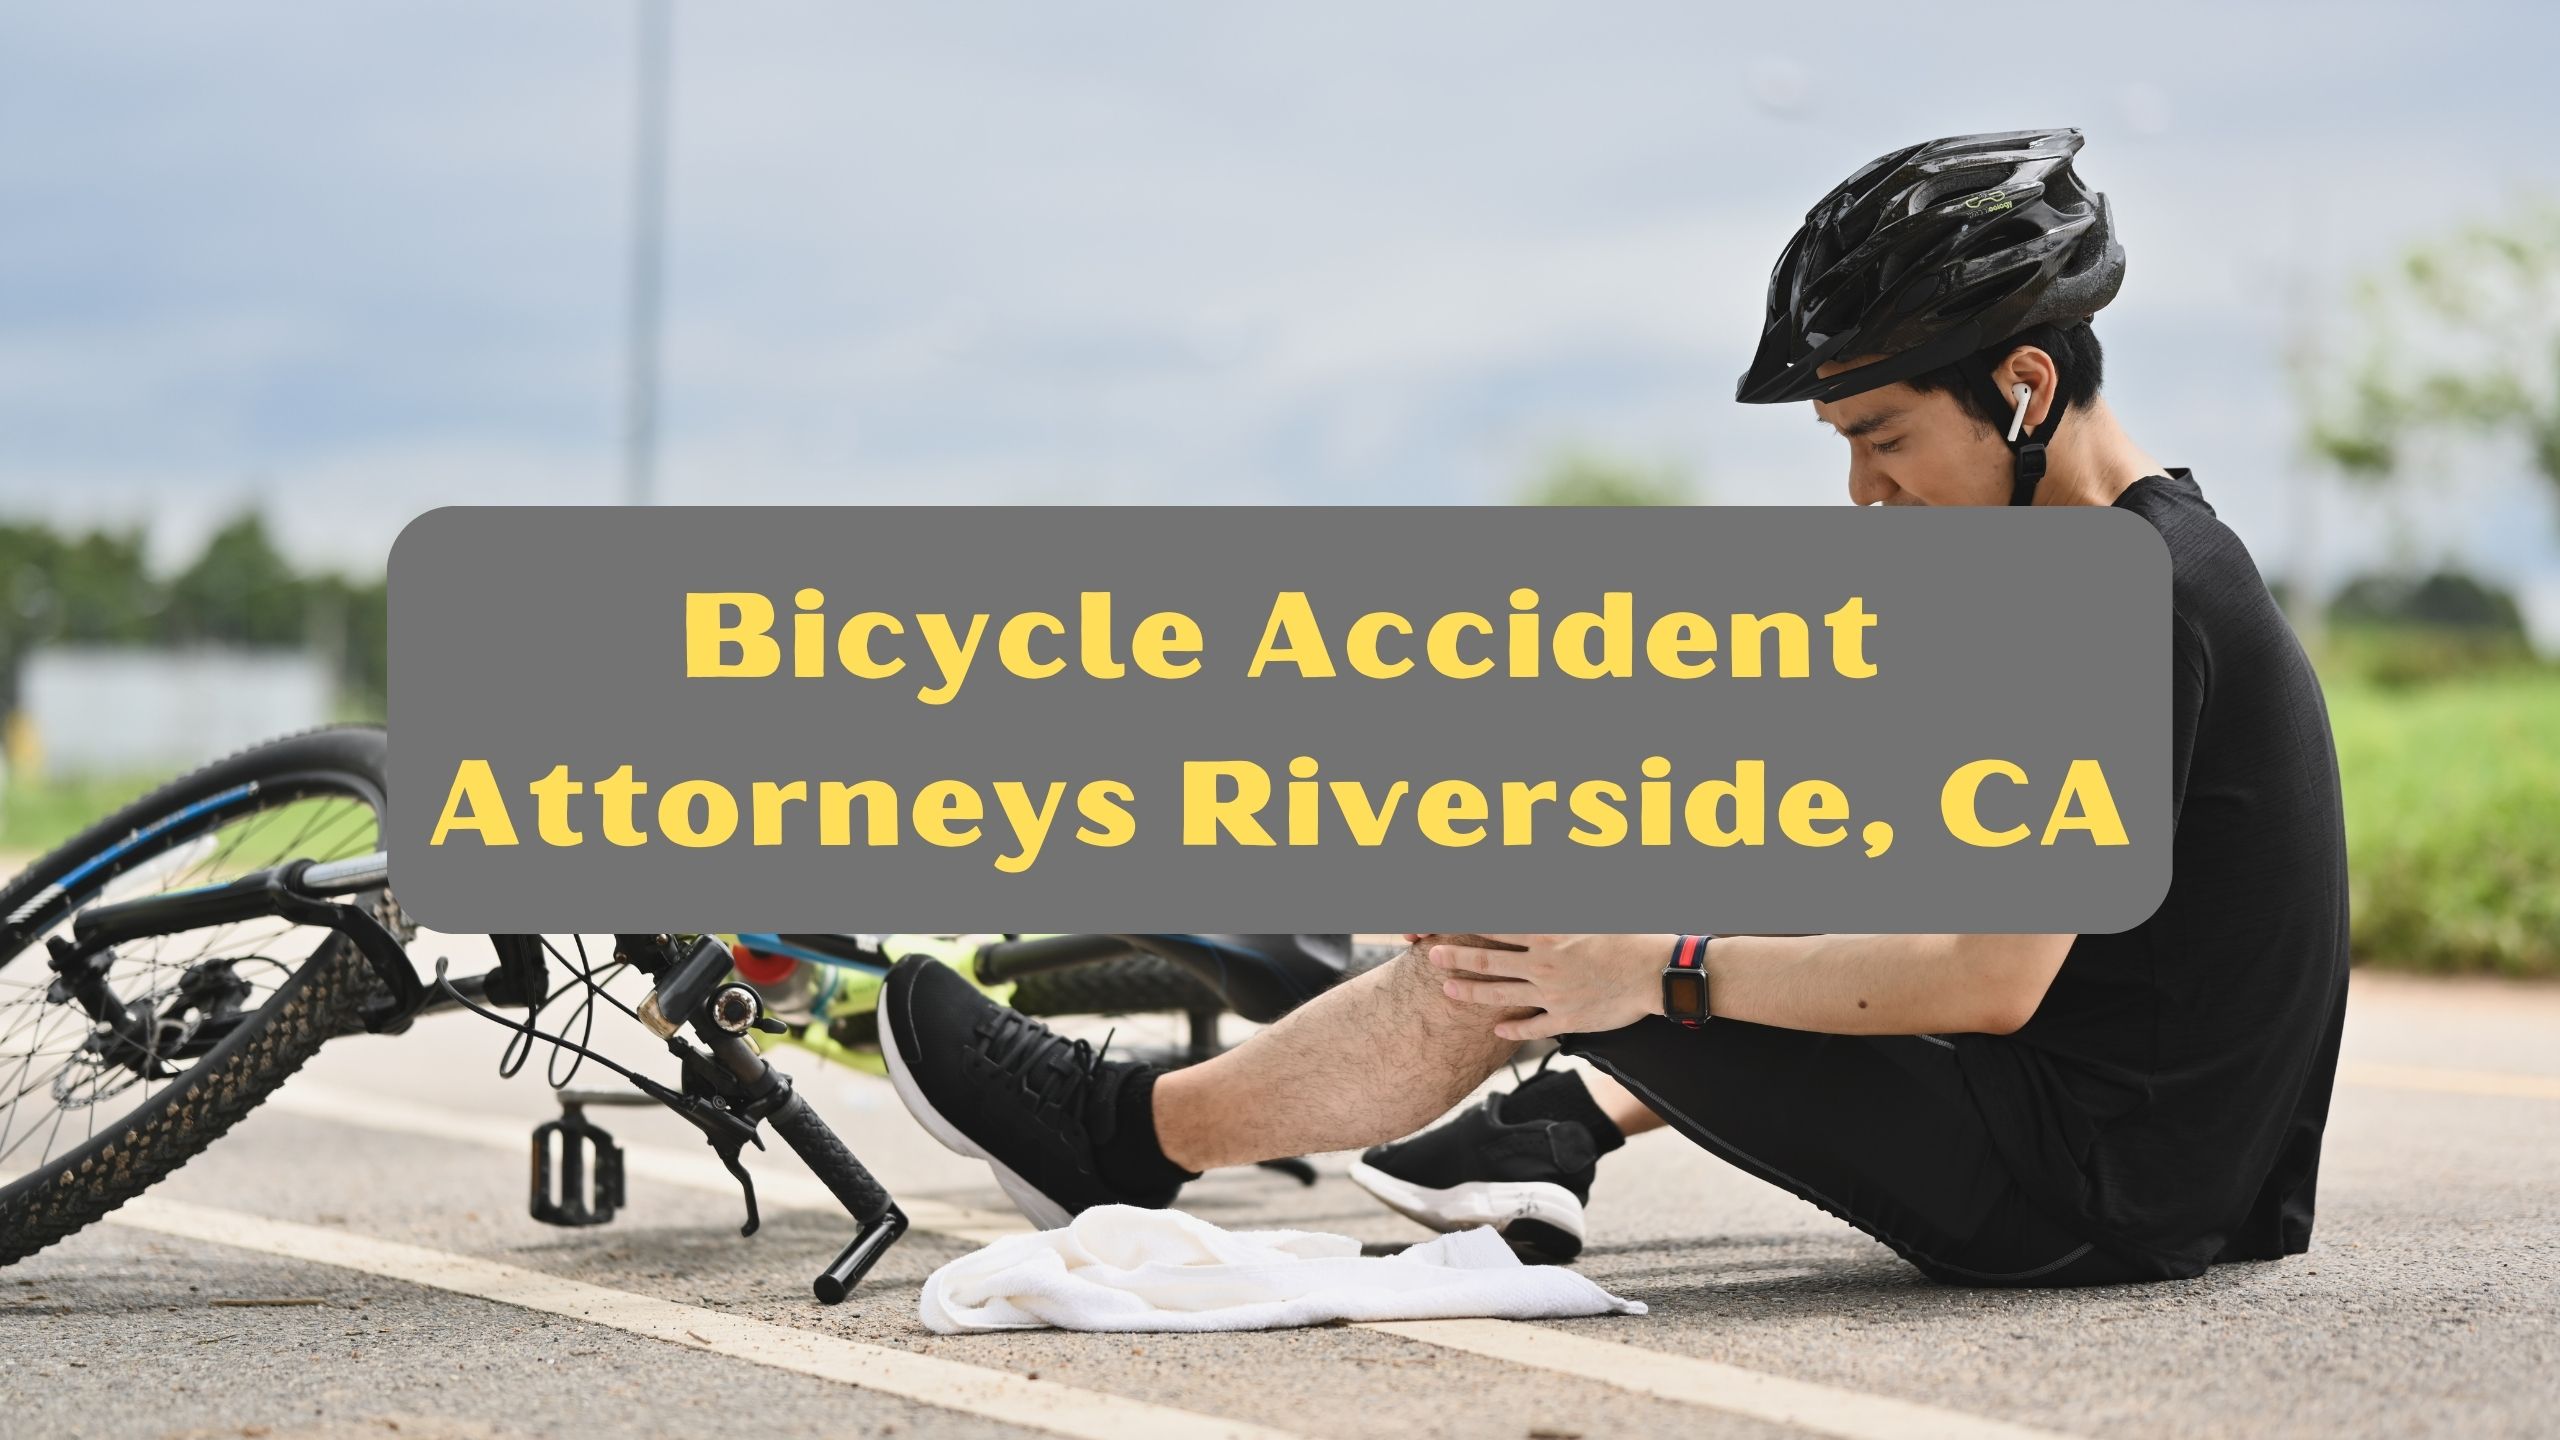 Bicycle Accident Attorneys Riverside